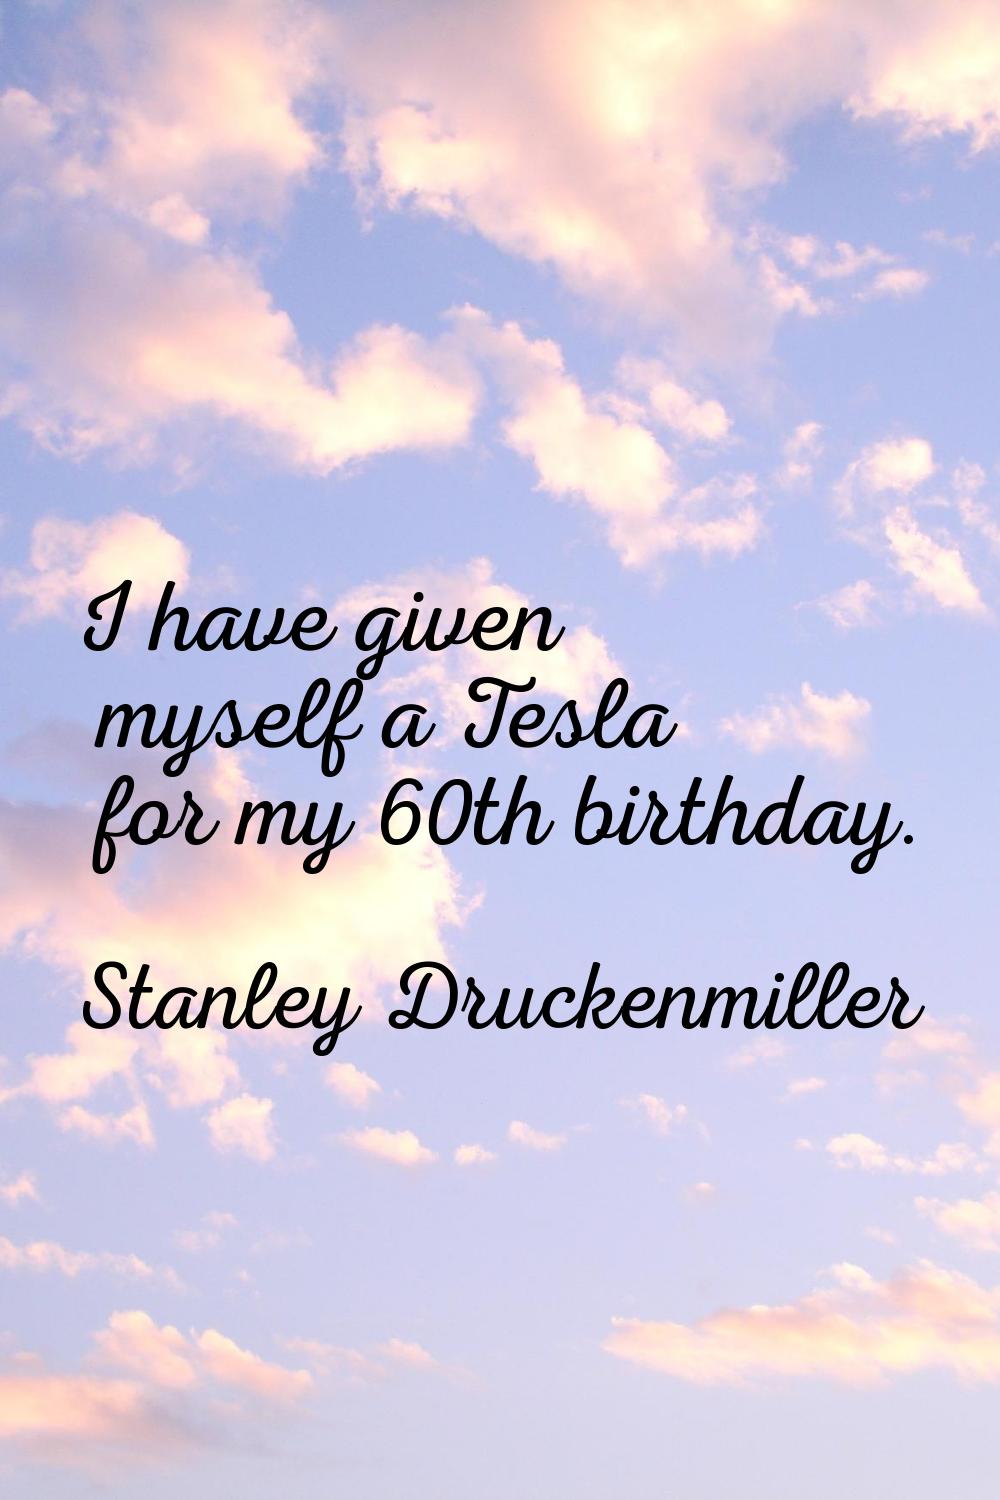 I have given myself a Tesla for my 60th birthday.